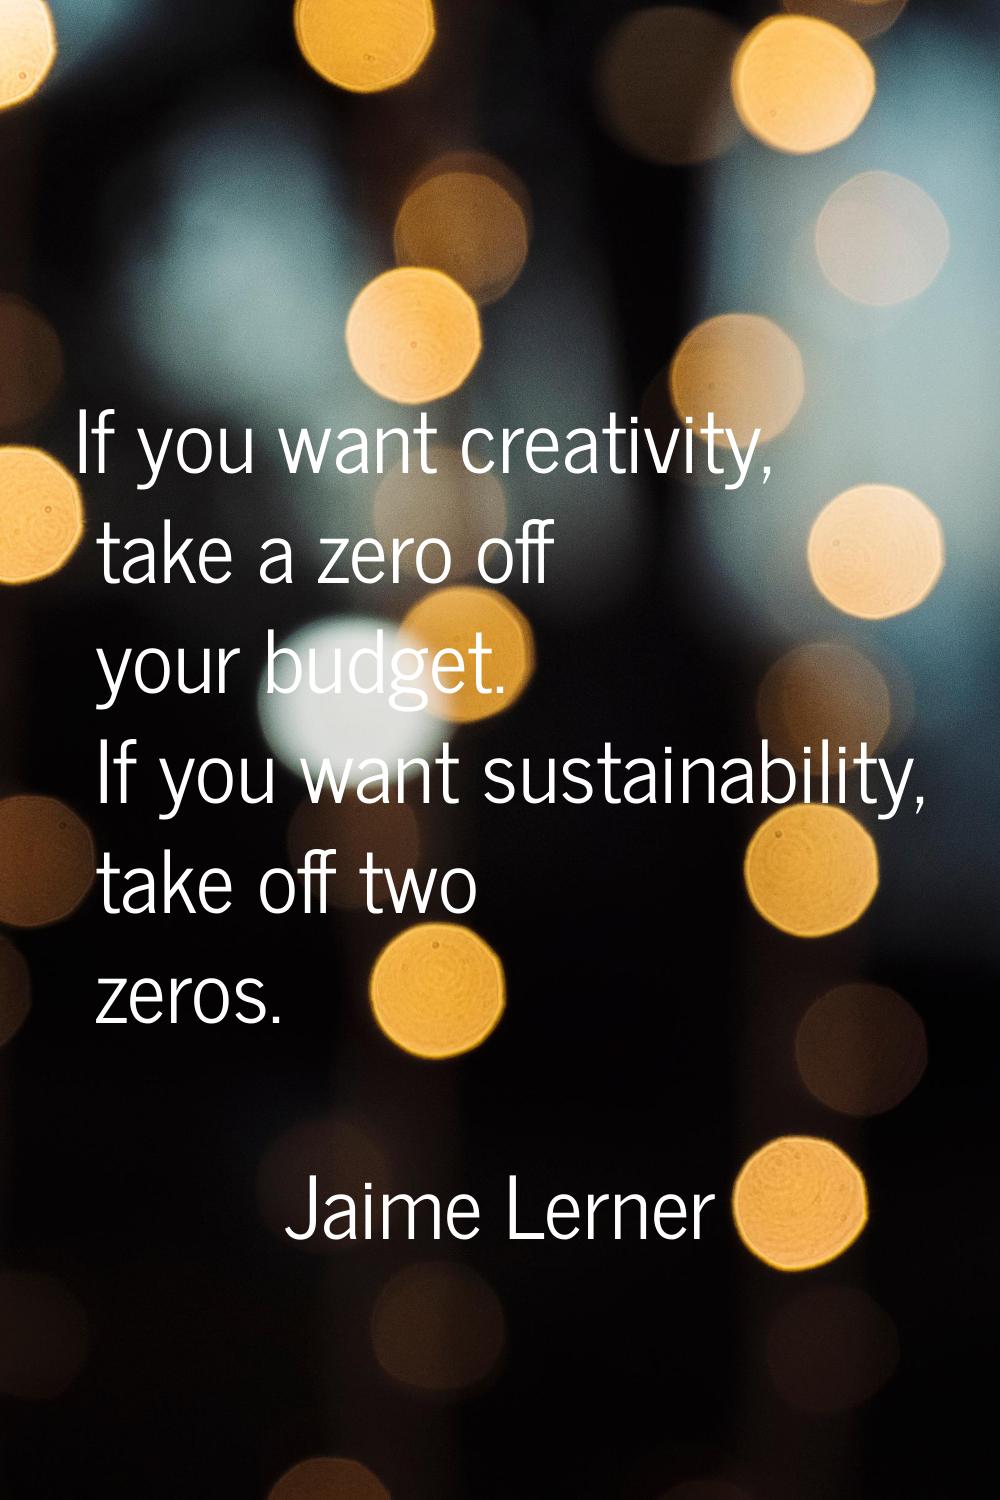 If you want creativity, take a zero off your budget. If you want sustainability, take off two zeros